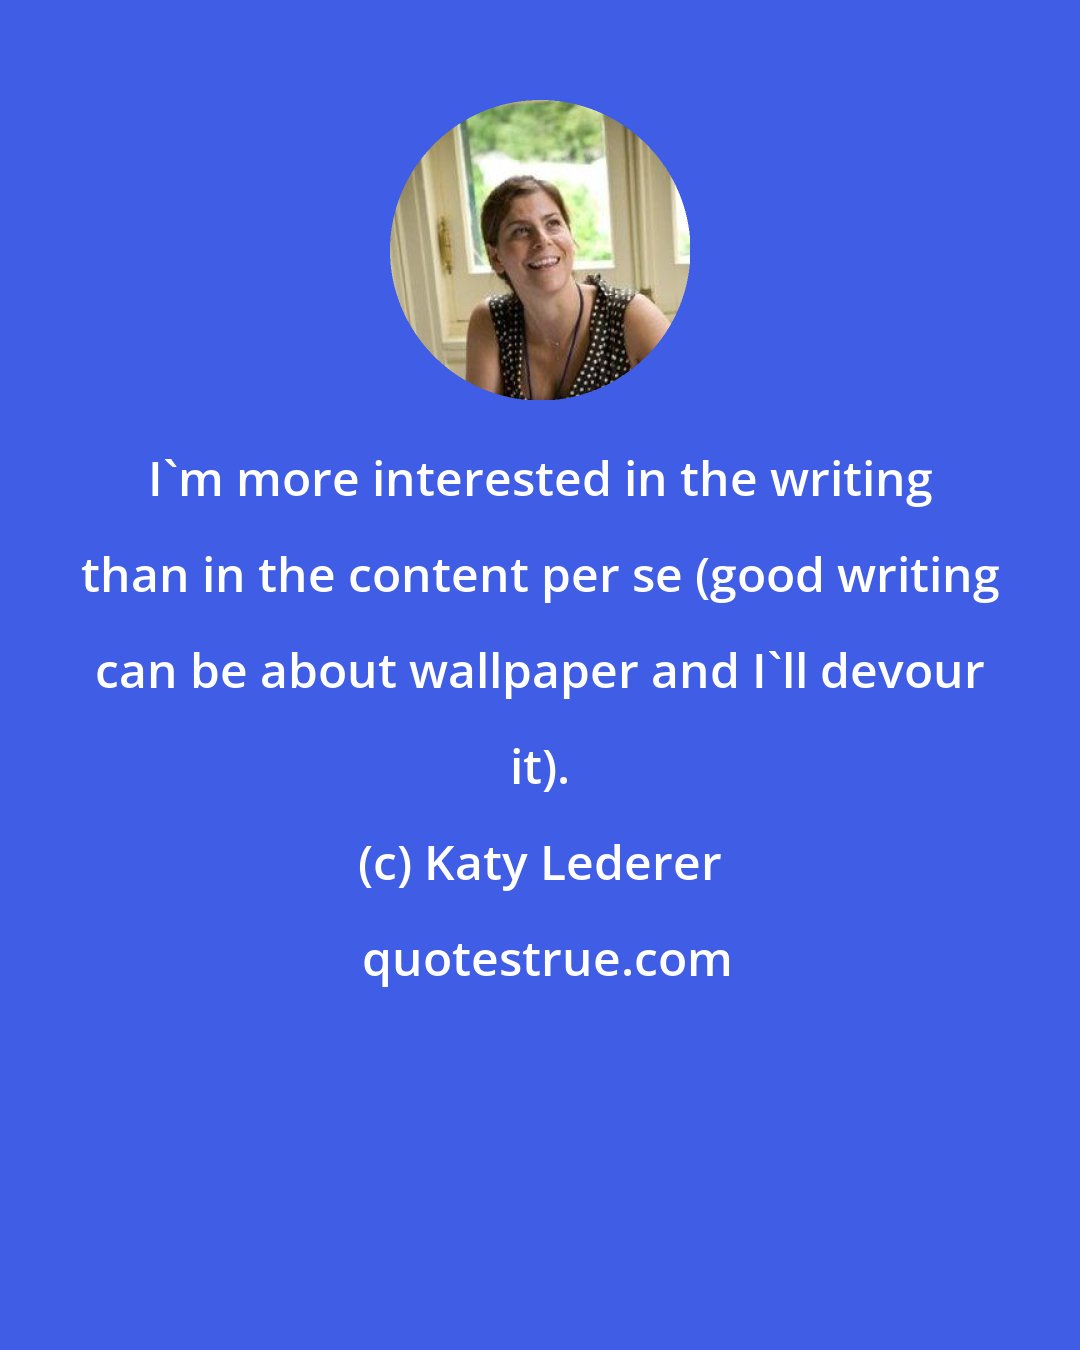 Katy Lederer: I'm more interested in the writing than in the content per se (good writing can be about wallpaper and I'll devour it).